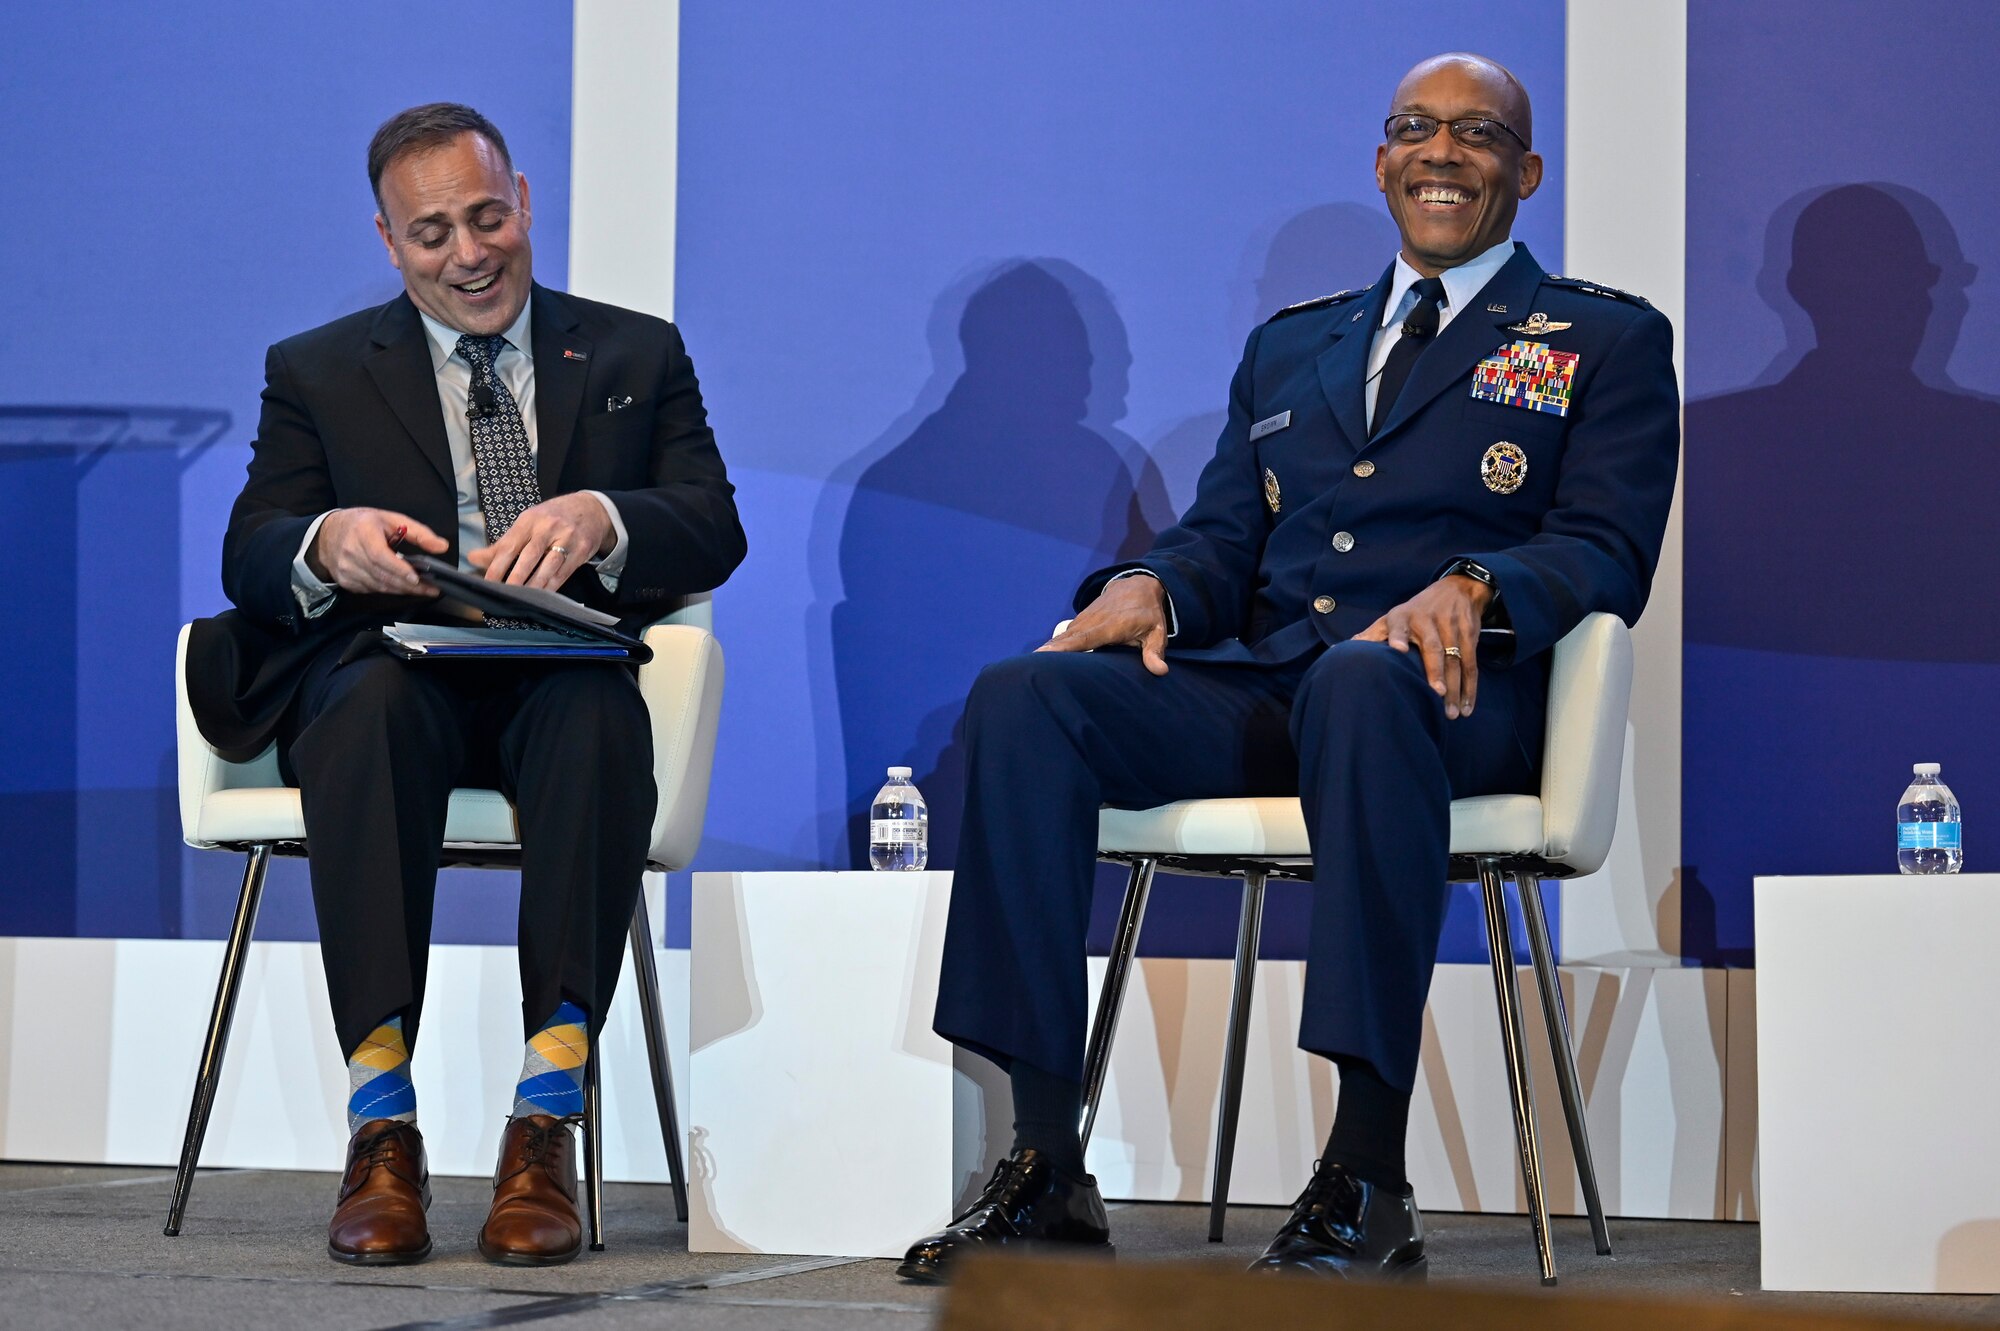 Air Force Chief of Staff Gen. CQ Brown, Jr. laughs with moderator Sal Nodjomian during a discussion for the 2022 Association of Defense Communities National Summit in Arlington, Va., March 8, 2022. Brown spoke about priorities and challenges for the Air Force and the importance of communities. (U.S. Air Force photo by Eric Dietrich)